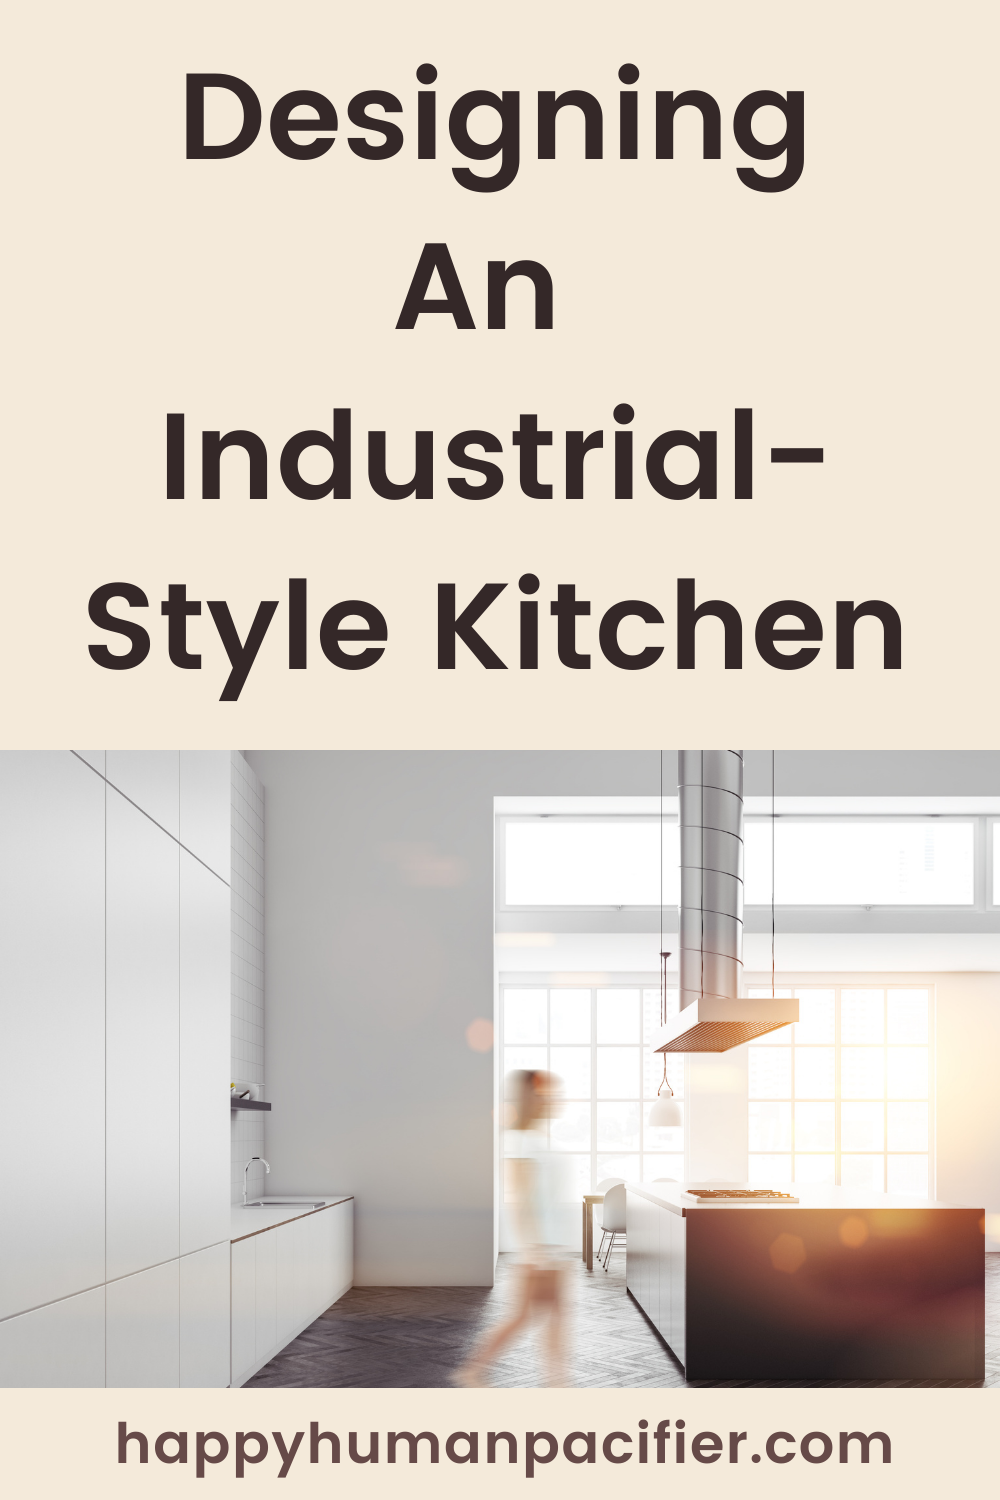 If you are planning a kitchen remodel soon, take a look at these few tips on designing an industrial-style kitchen to give your kitchen an ultra-modern look.